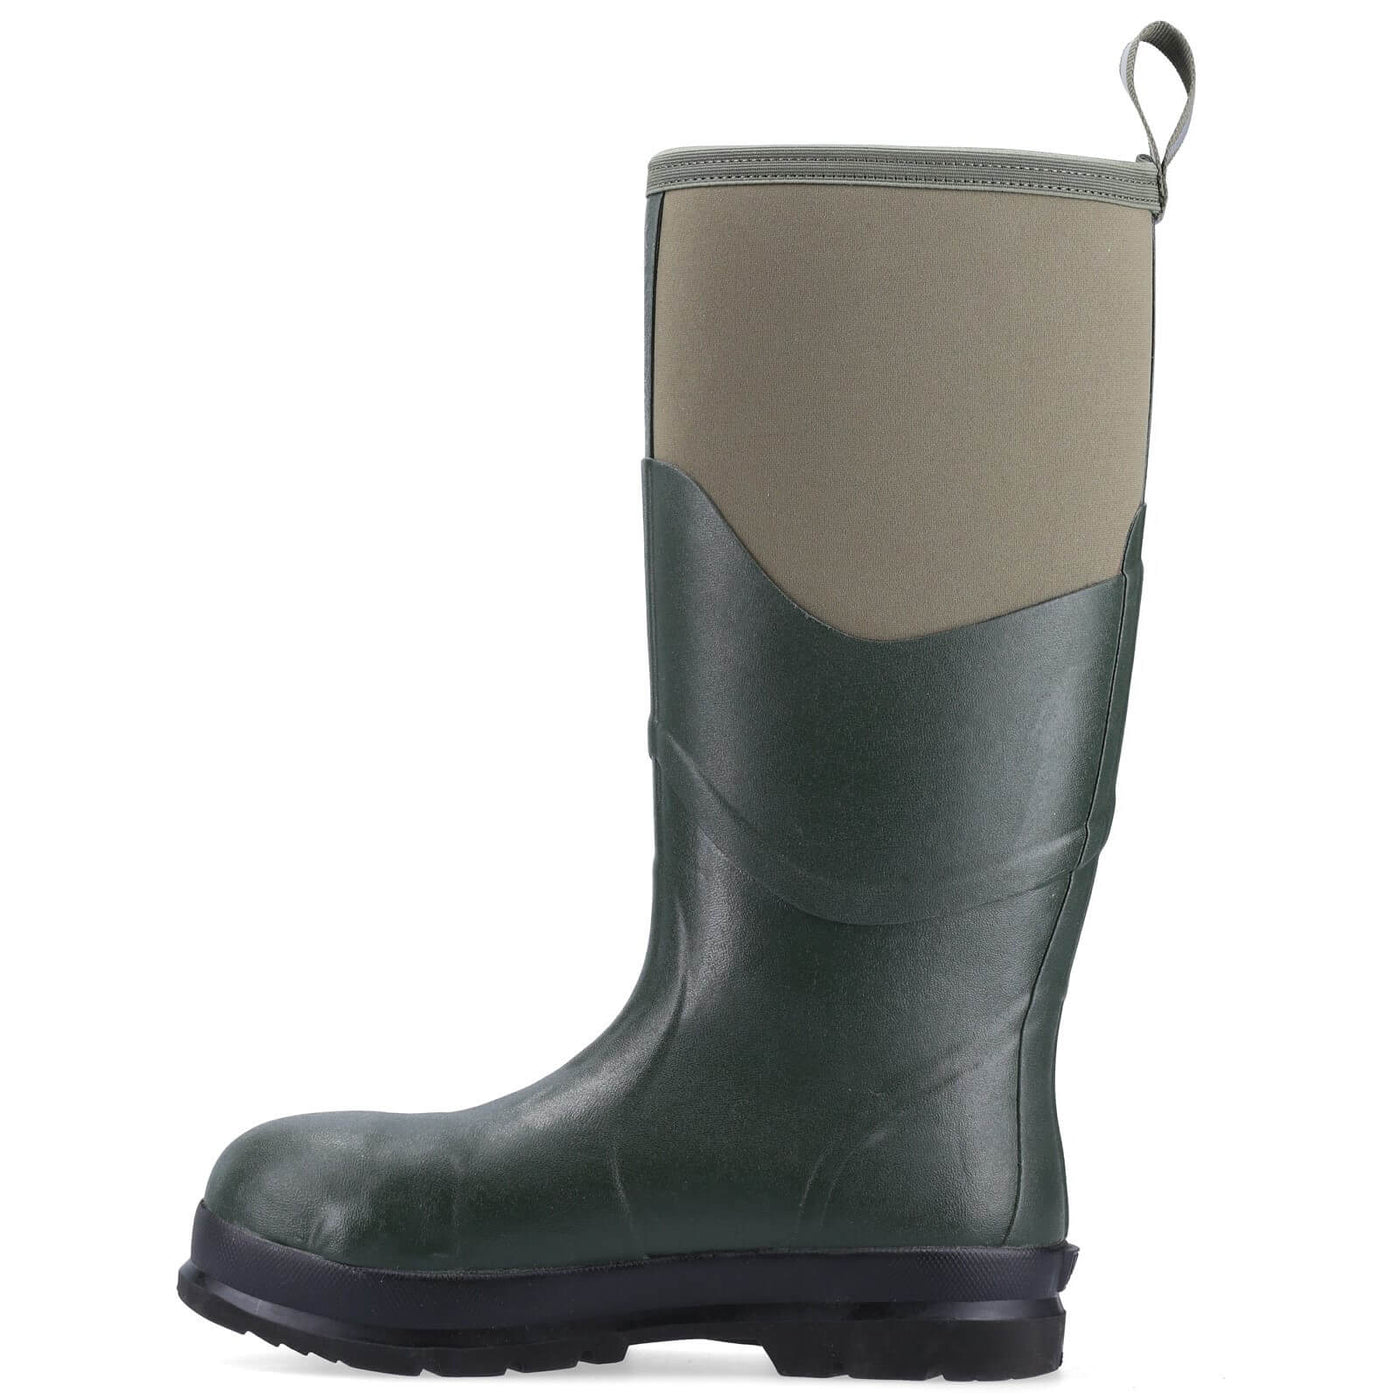 Muck Boots Chore Max S5 Safety Wellies Moss 7#colour_moss-army-green